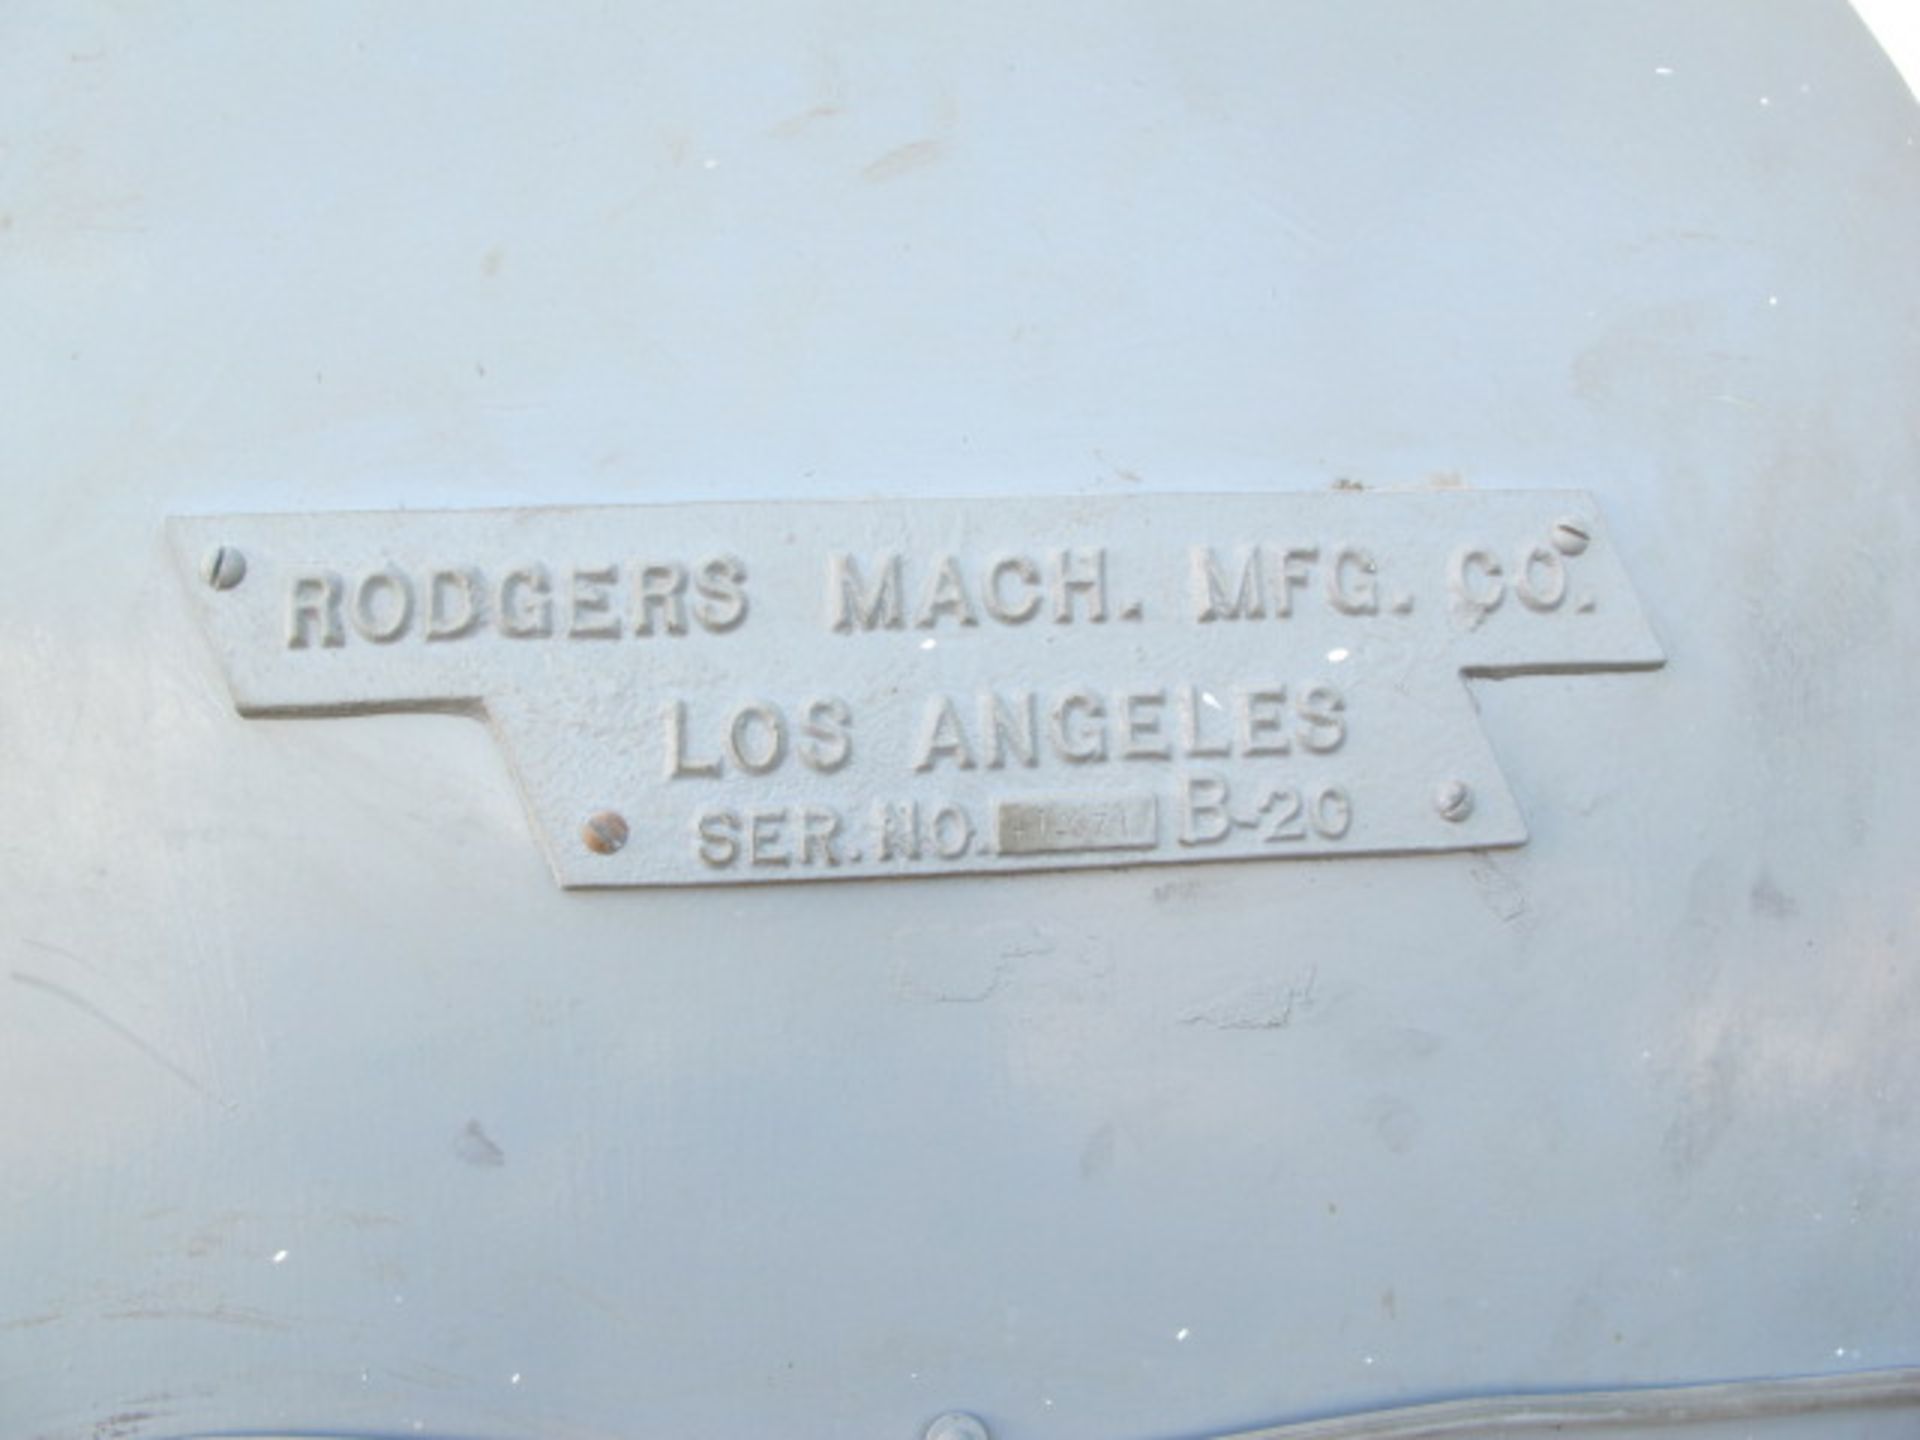 Rodgers mdl. B-20 19" Vertical Band Saw s/n 41371 - Image 3 of 3